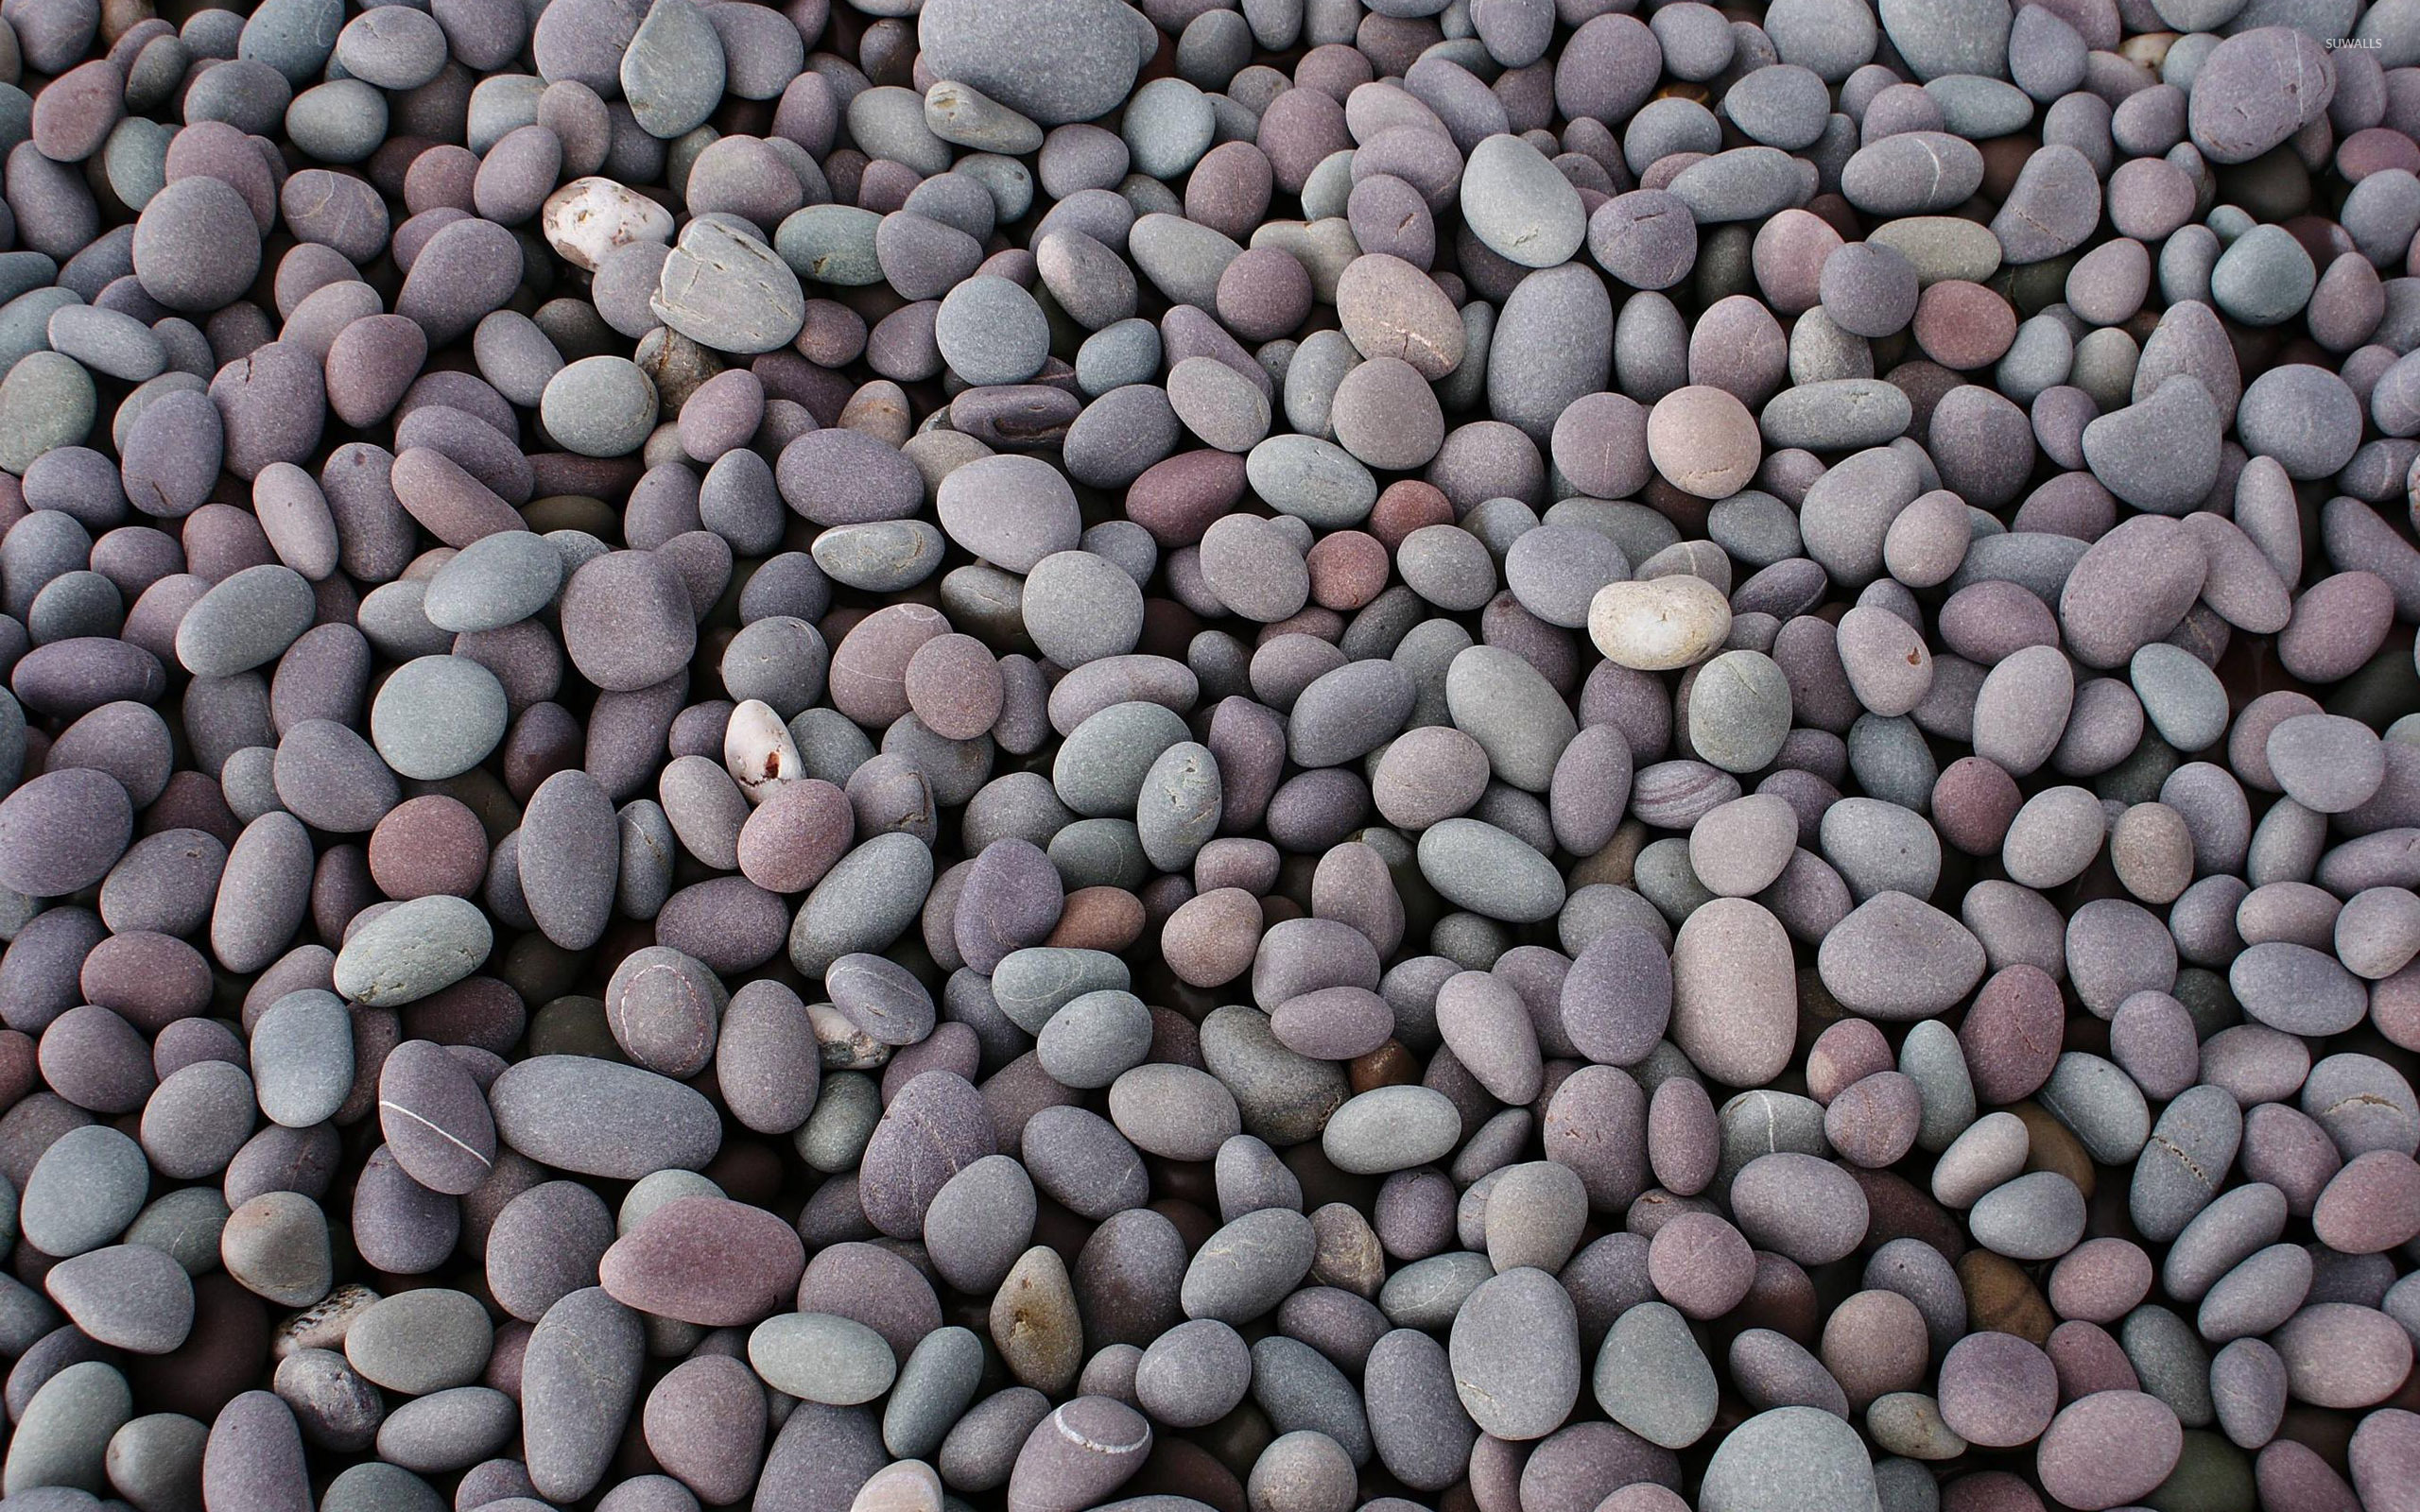 Smooth Pebbles Wallpaper Photography Wallpapers 29087 HD Wallpapers Download Free Map Images Wallpaper [wallpaper376.blogspot.com]